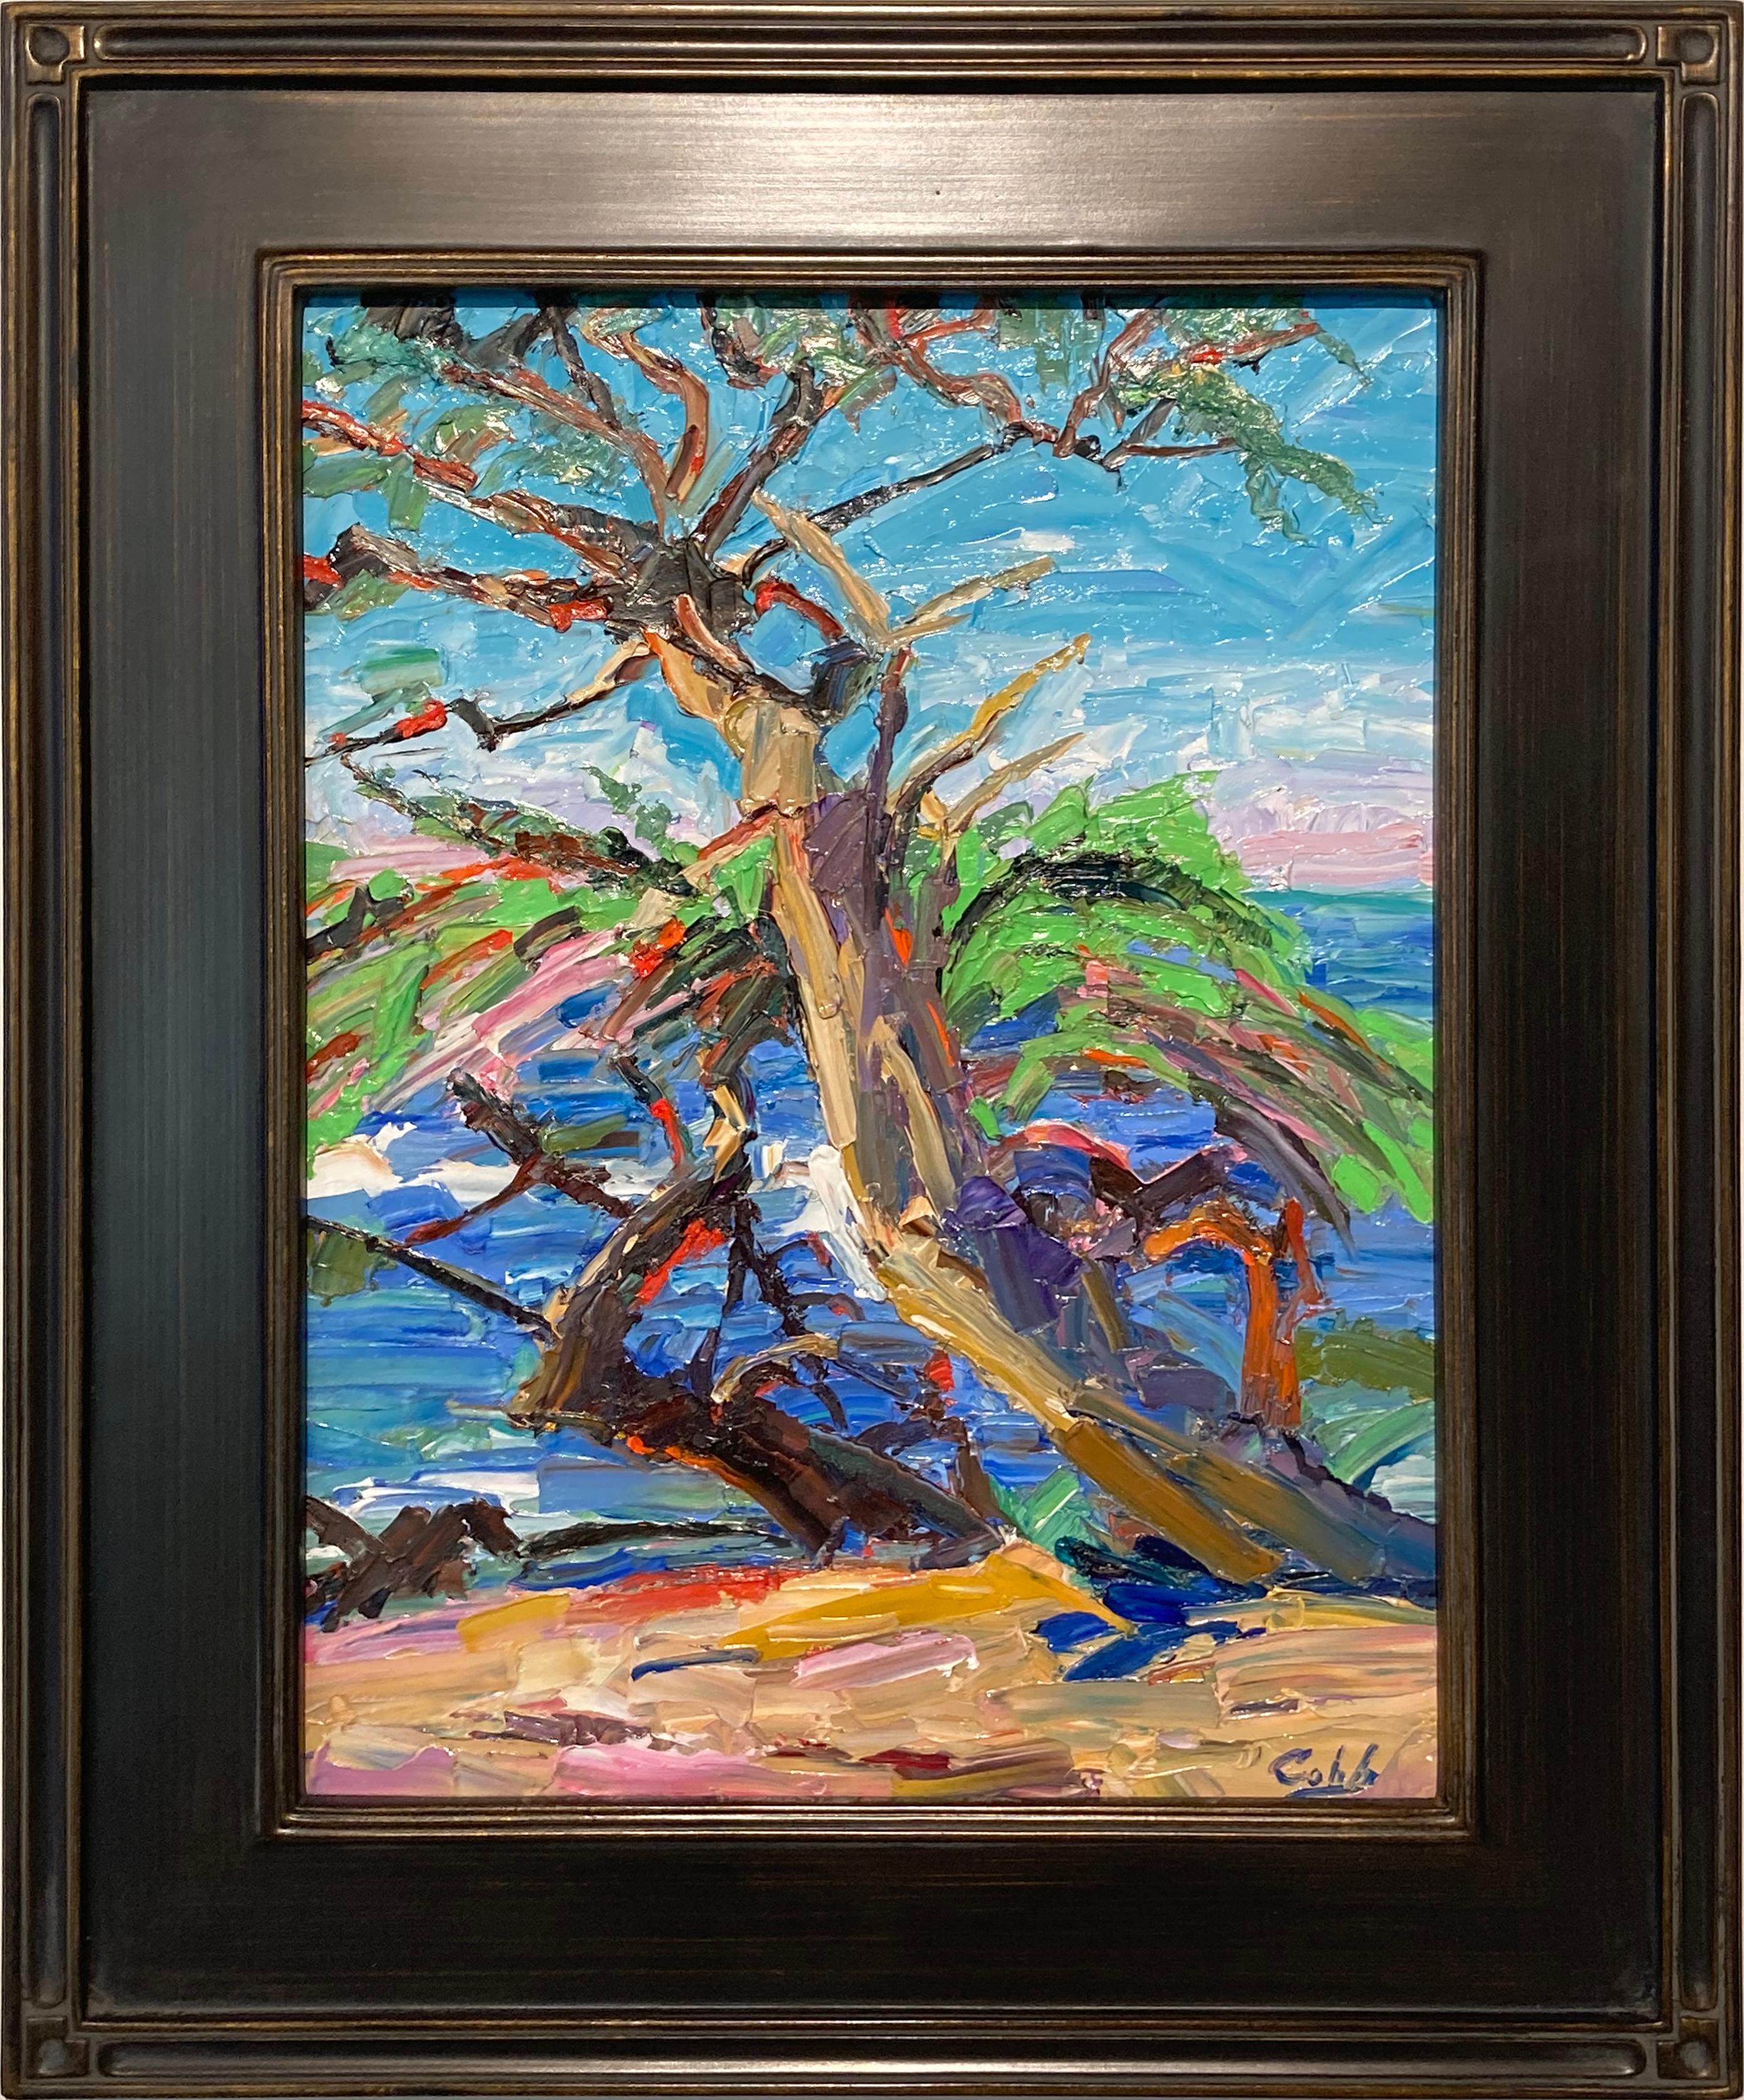 Jim Cobb - 'Cypress Point, ' by James Cobb, Oil on Gesso Board